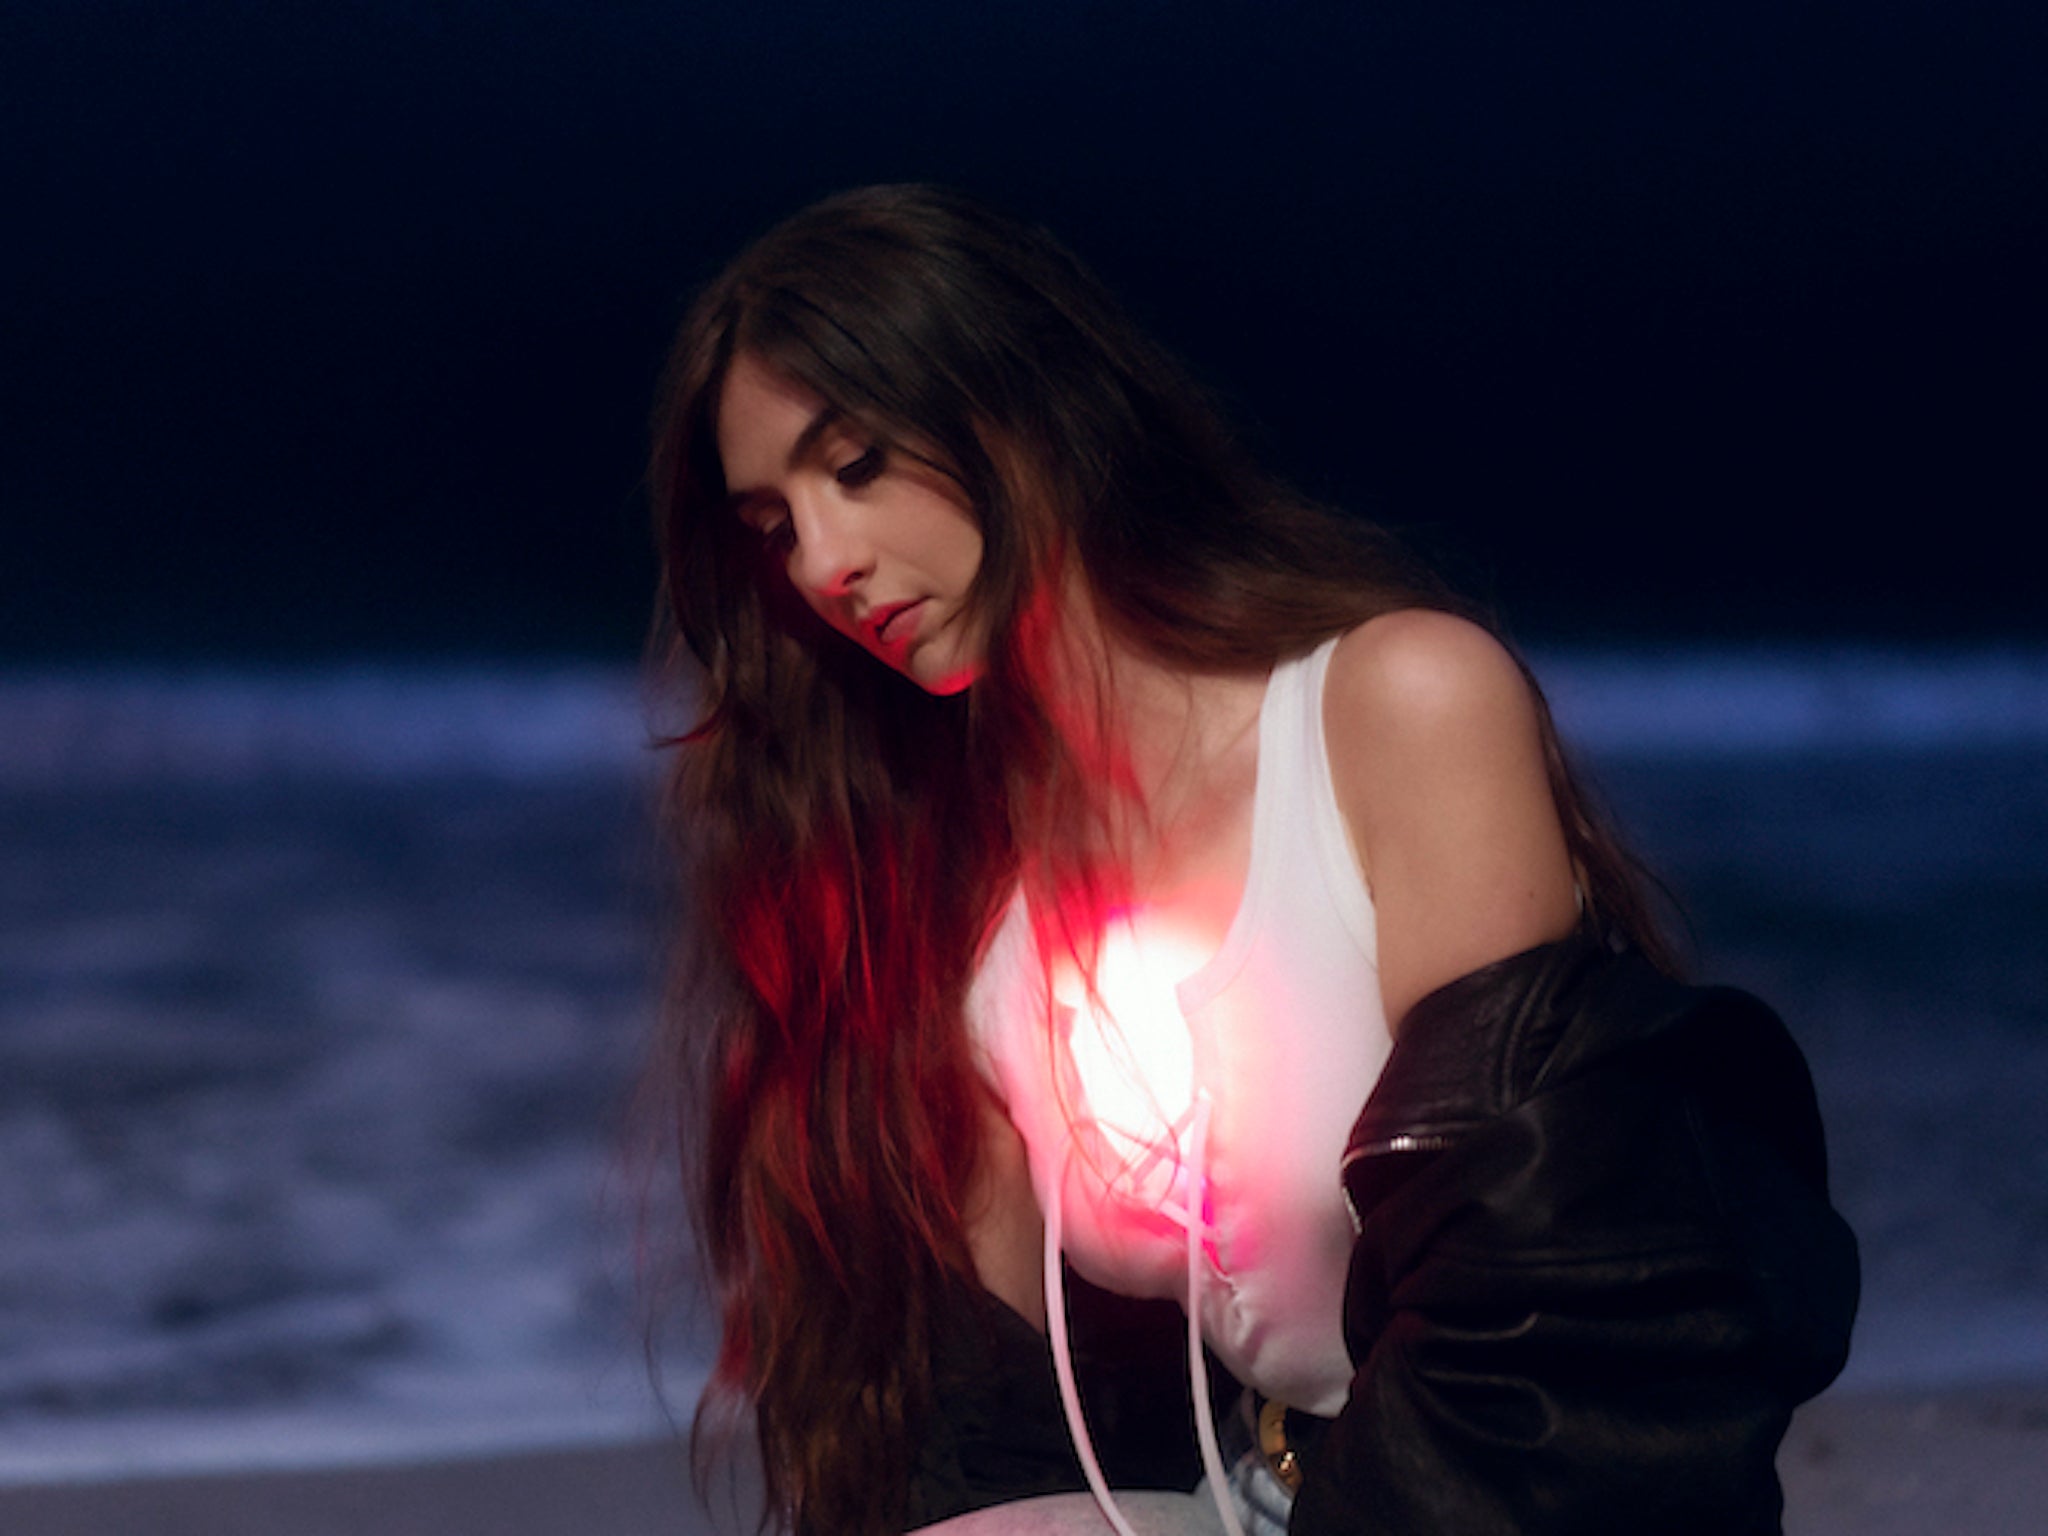 Natalie Mering: Let there be light